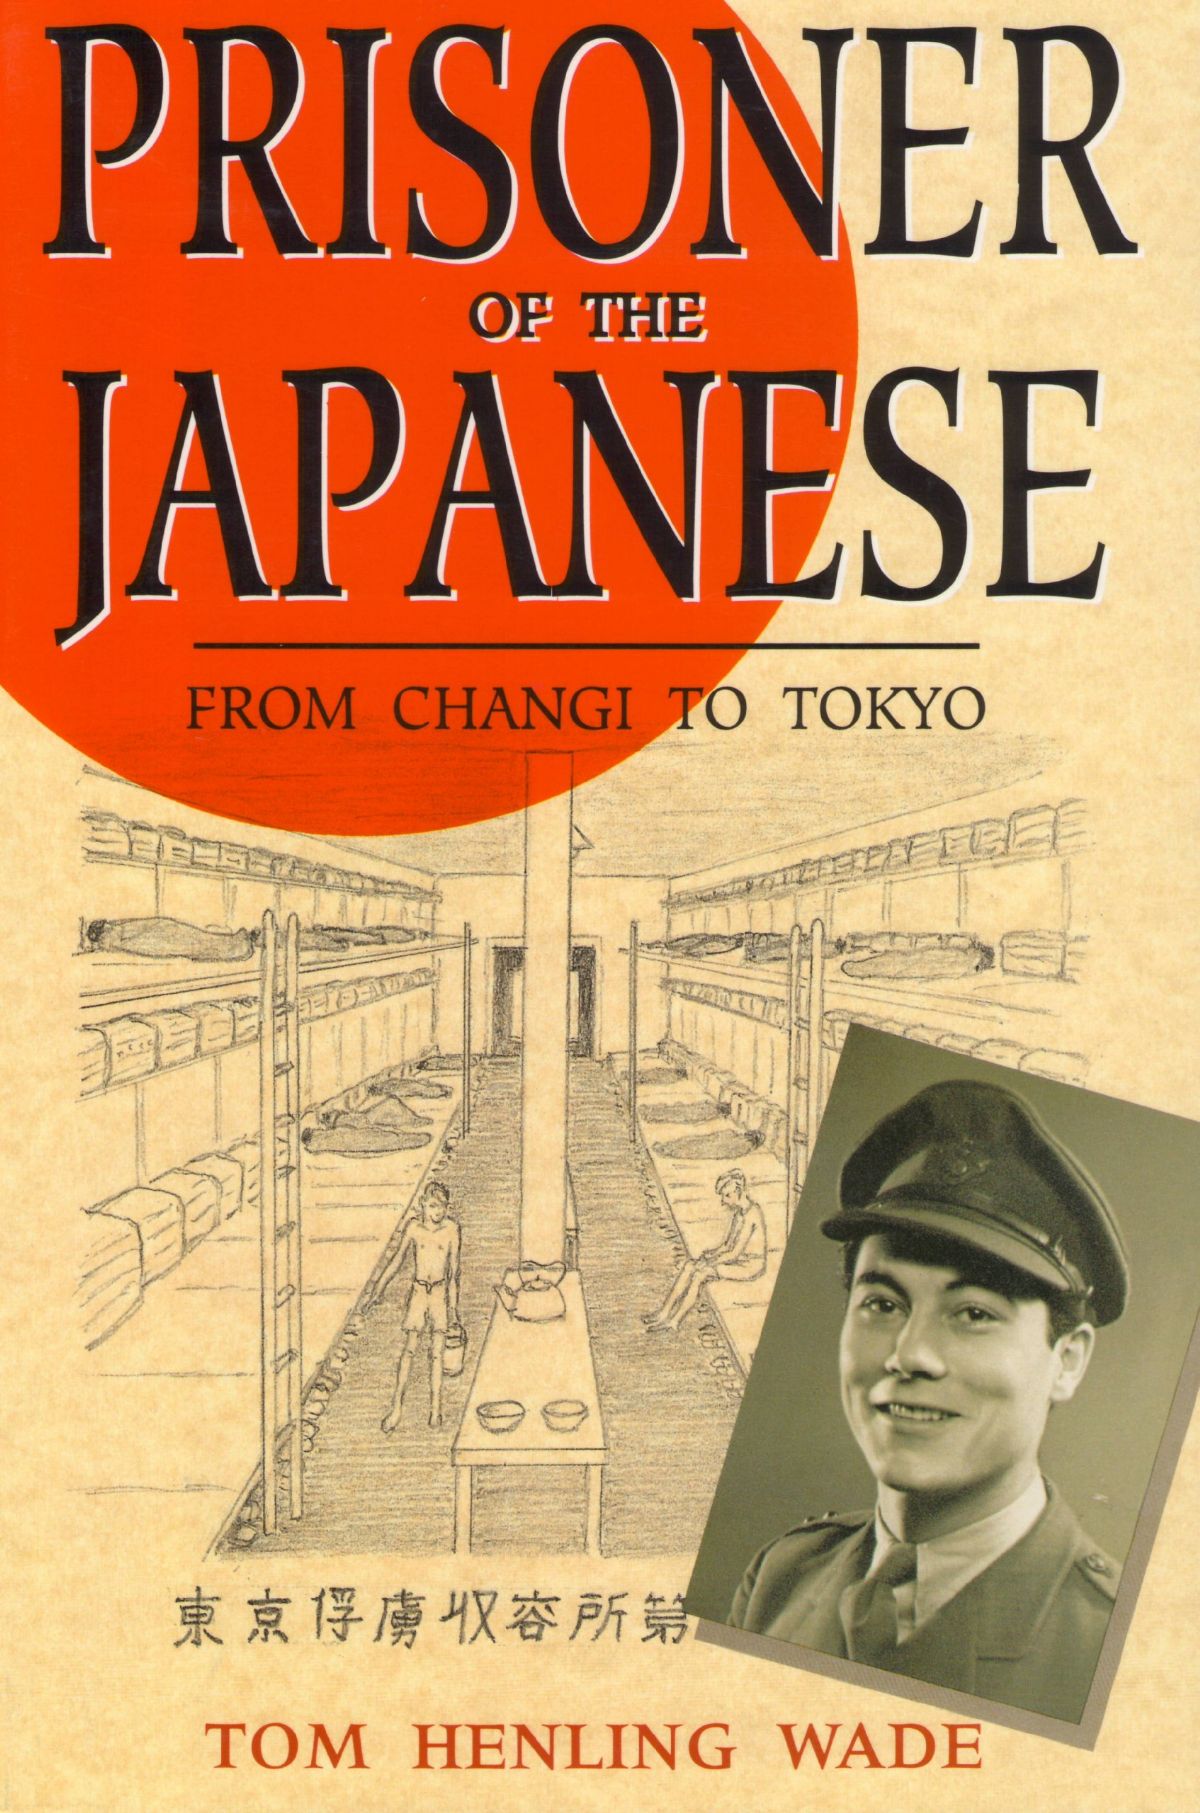 Prisoner of the Japanese: From Changi to Tokyo